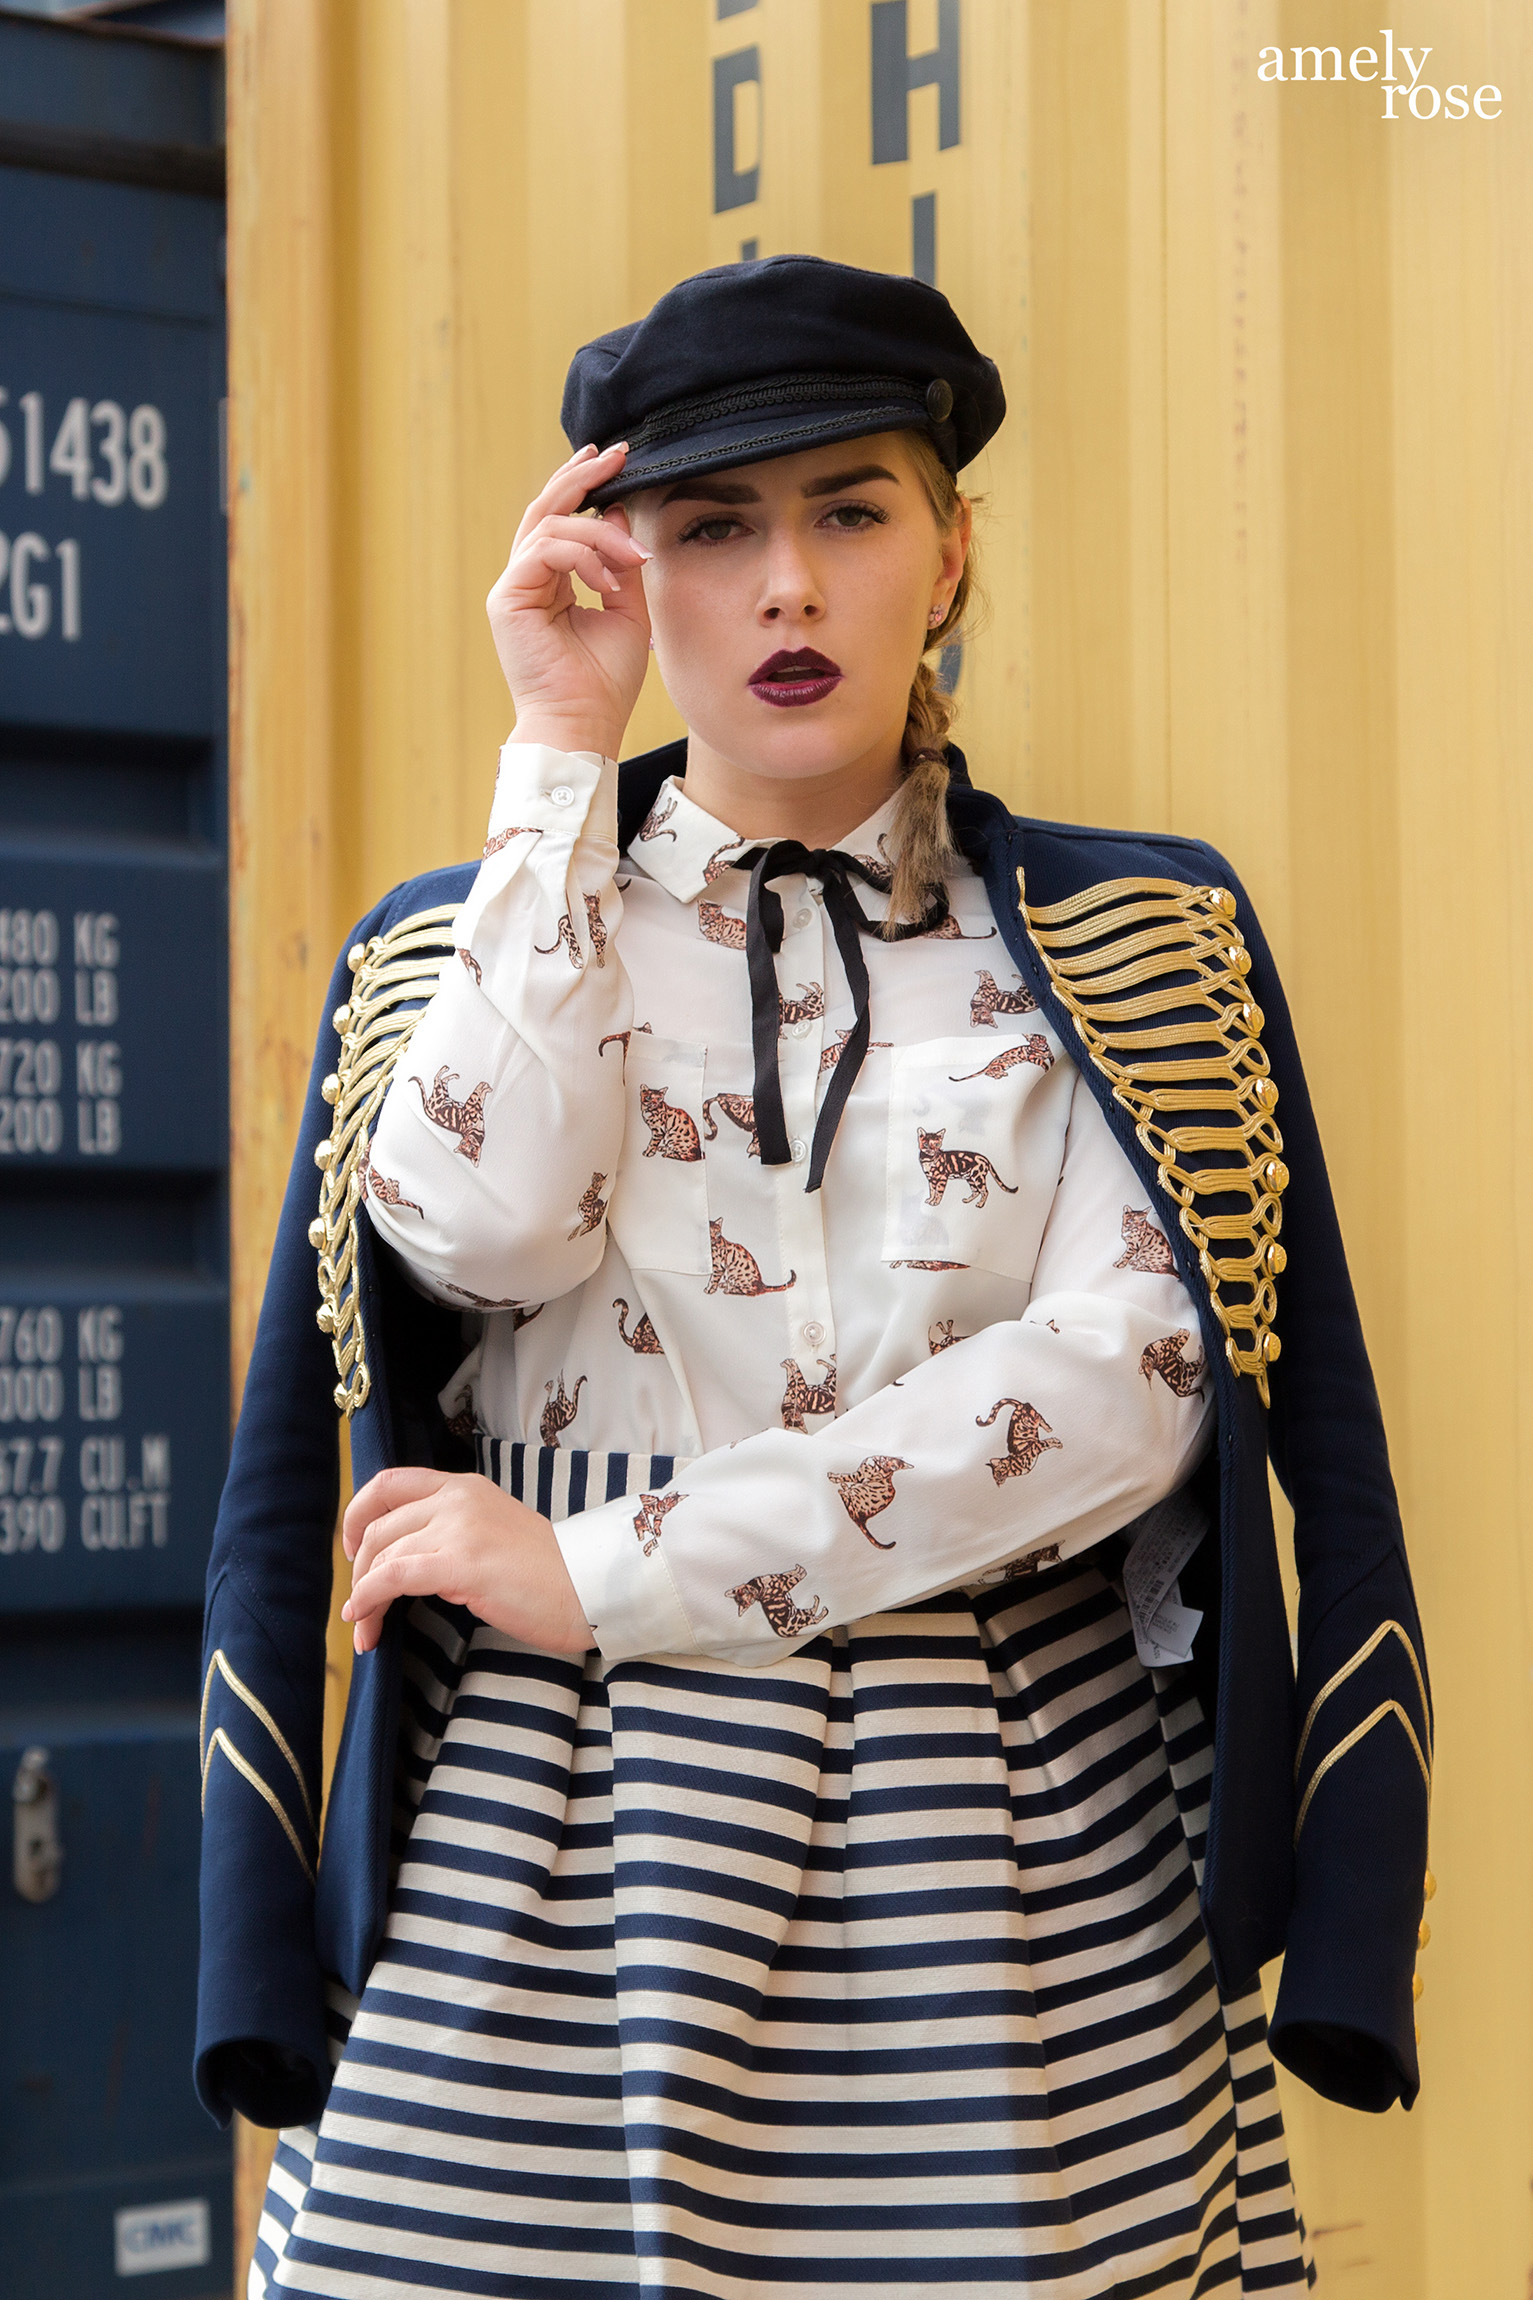 amely rose a german fashion blogger wearing a marine uniform as a summerlook with a catprint blouse and hat